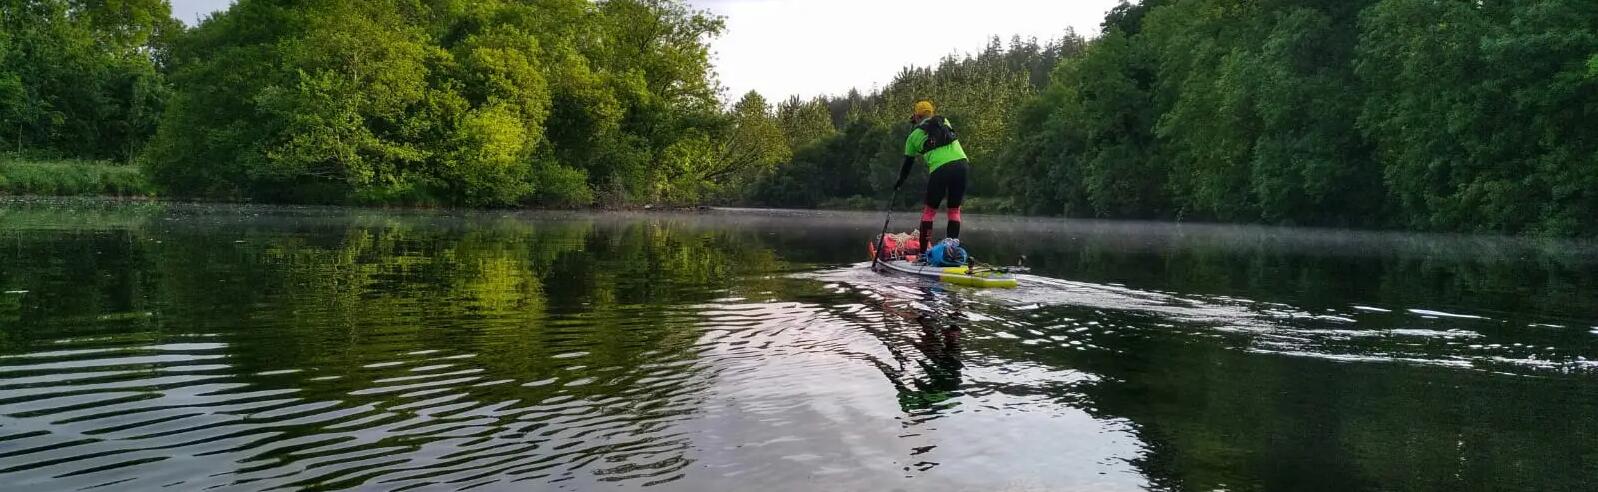 nantes brest inflatable stand up paddle